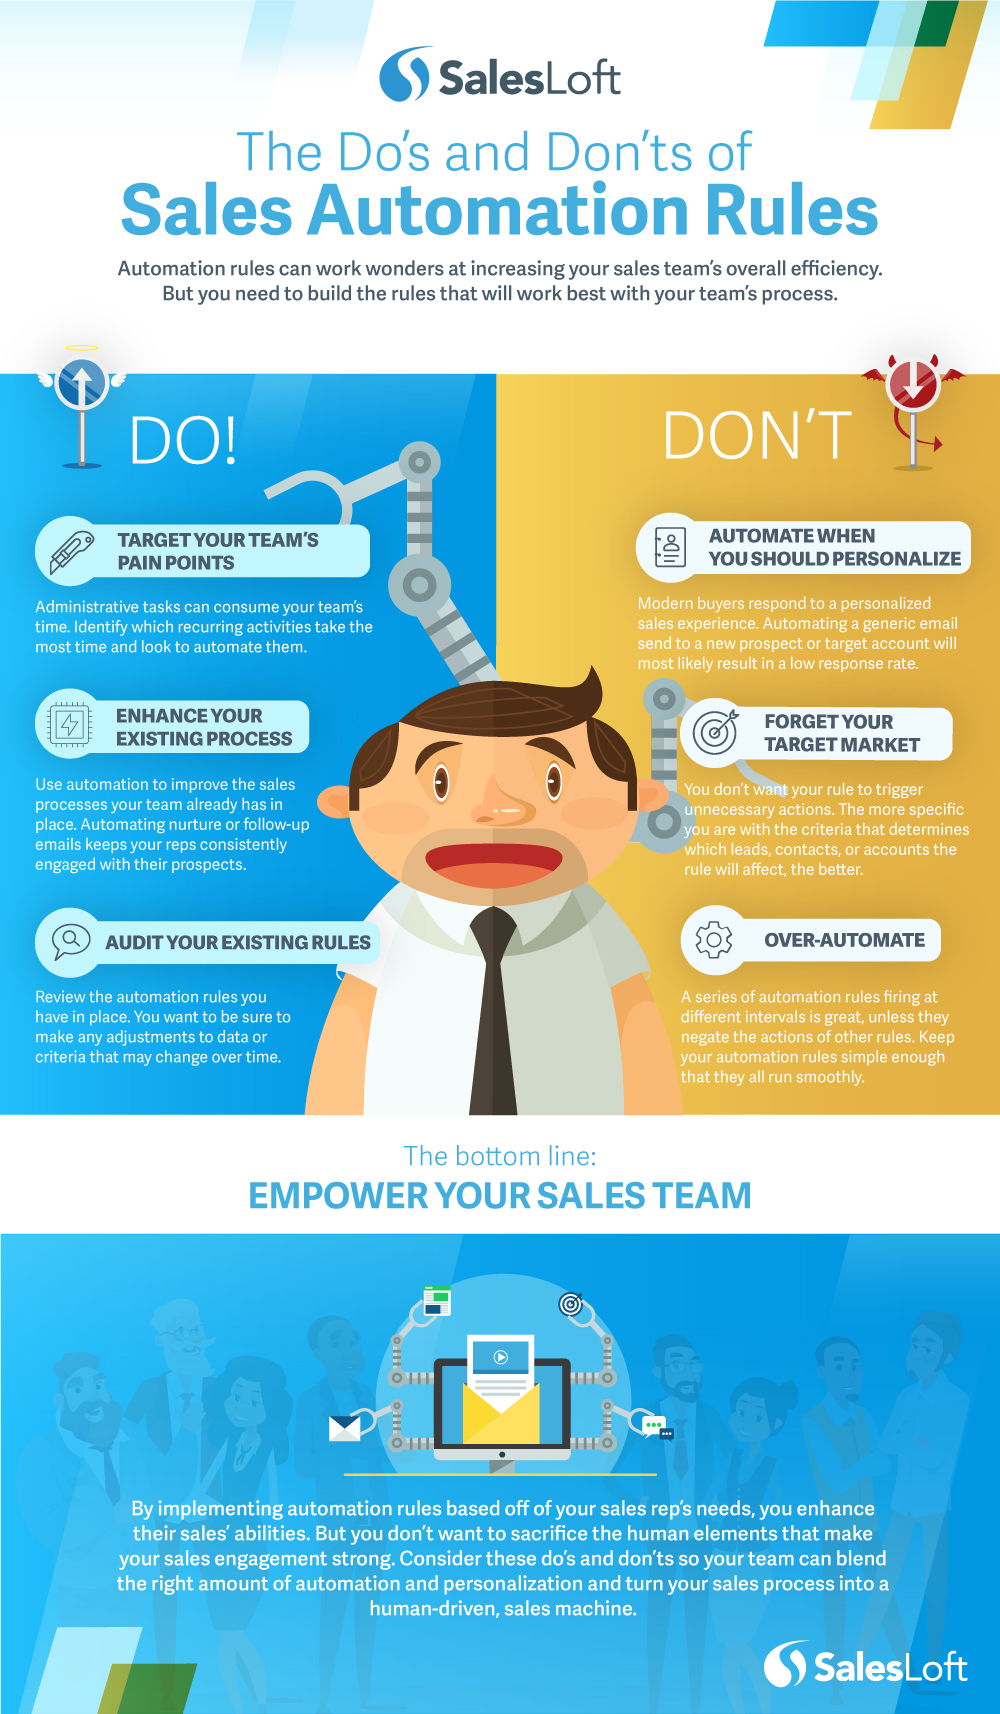 Then Do's and Don'ts of Sales Automation Rules {Infographic}